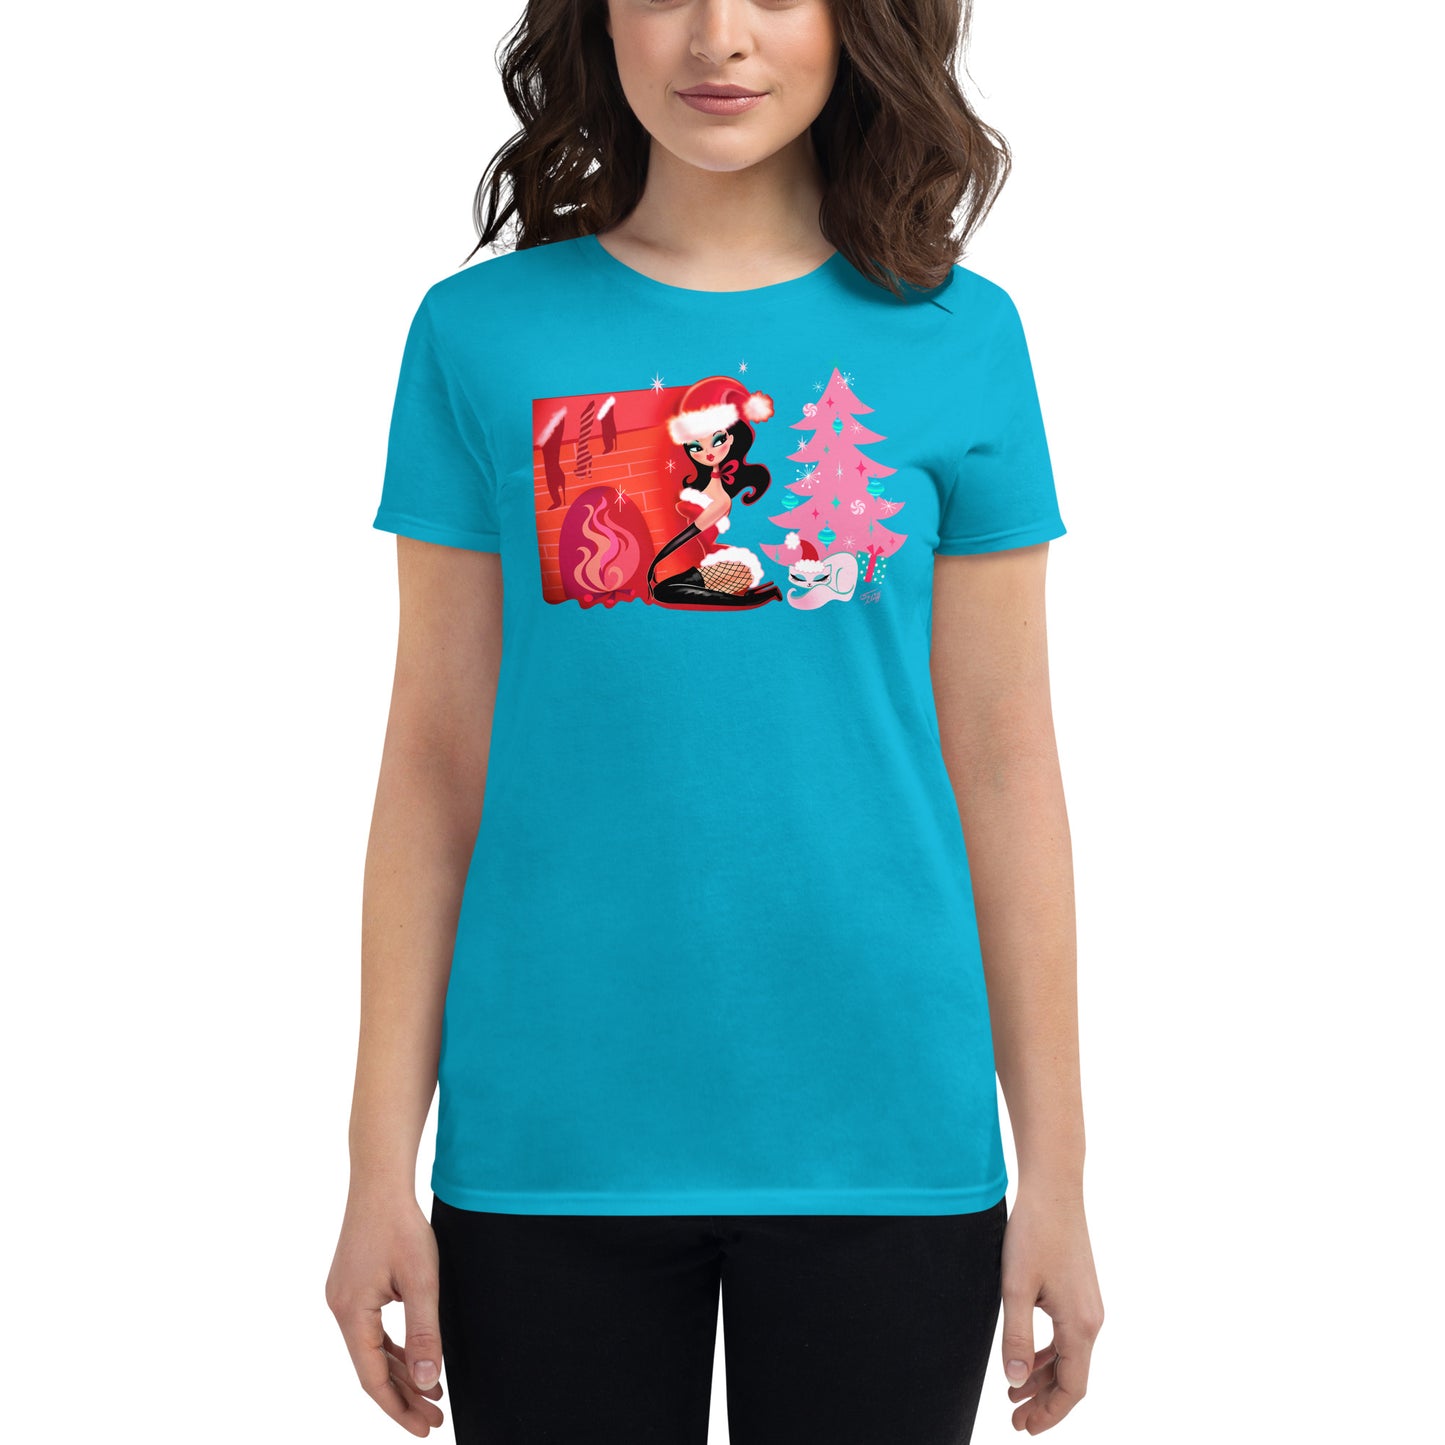 Sassy Santa next to the Fireplace • Women's Relaxed Fit T-Shirt